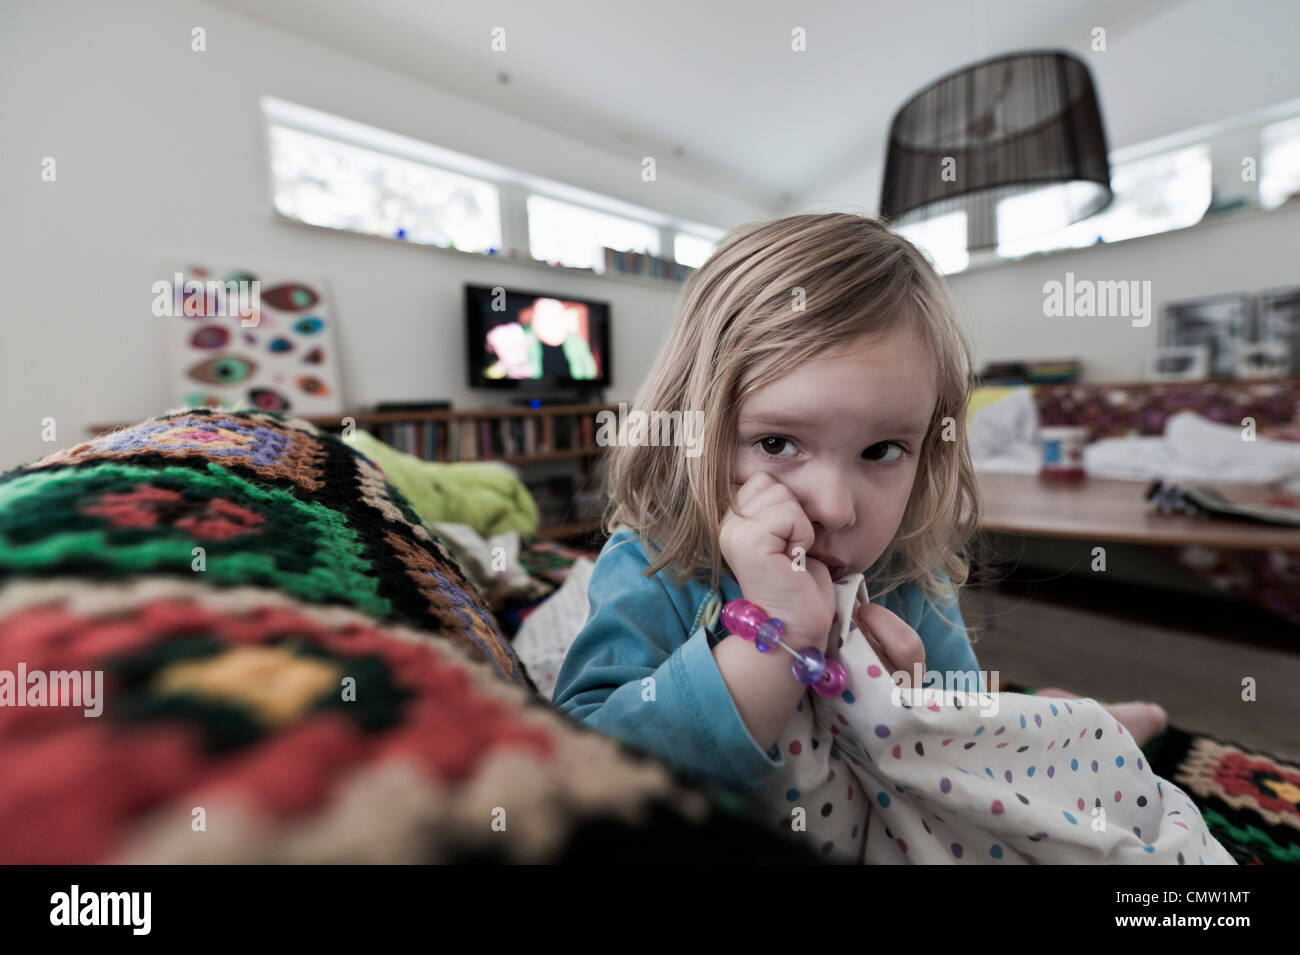 Blond haired girl sucking thumb while resting on sofa Stock Photo